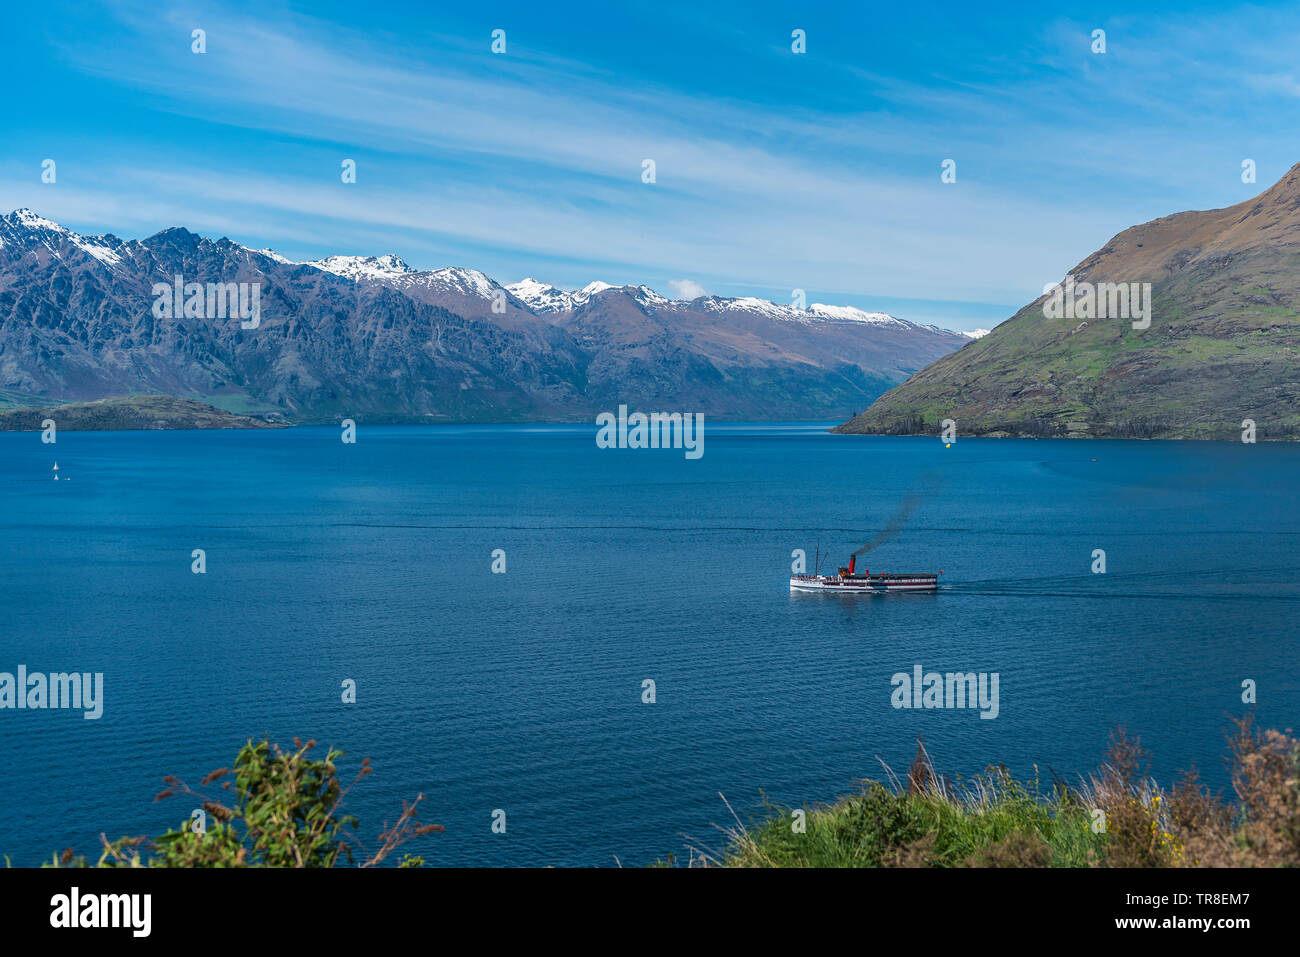 View of the landscape of the lake Wakatipu, Queenstown, New Zealand. Copy space for text Stock Photo